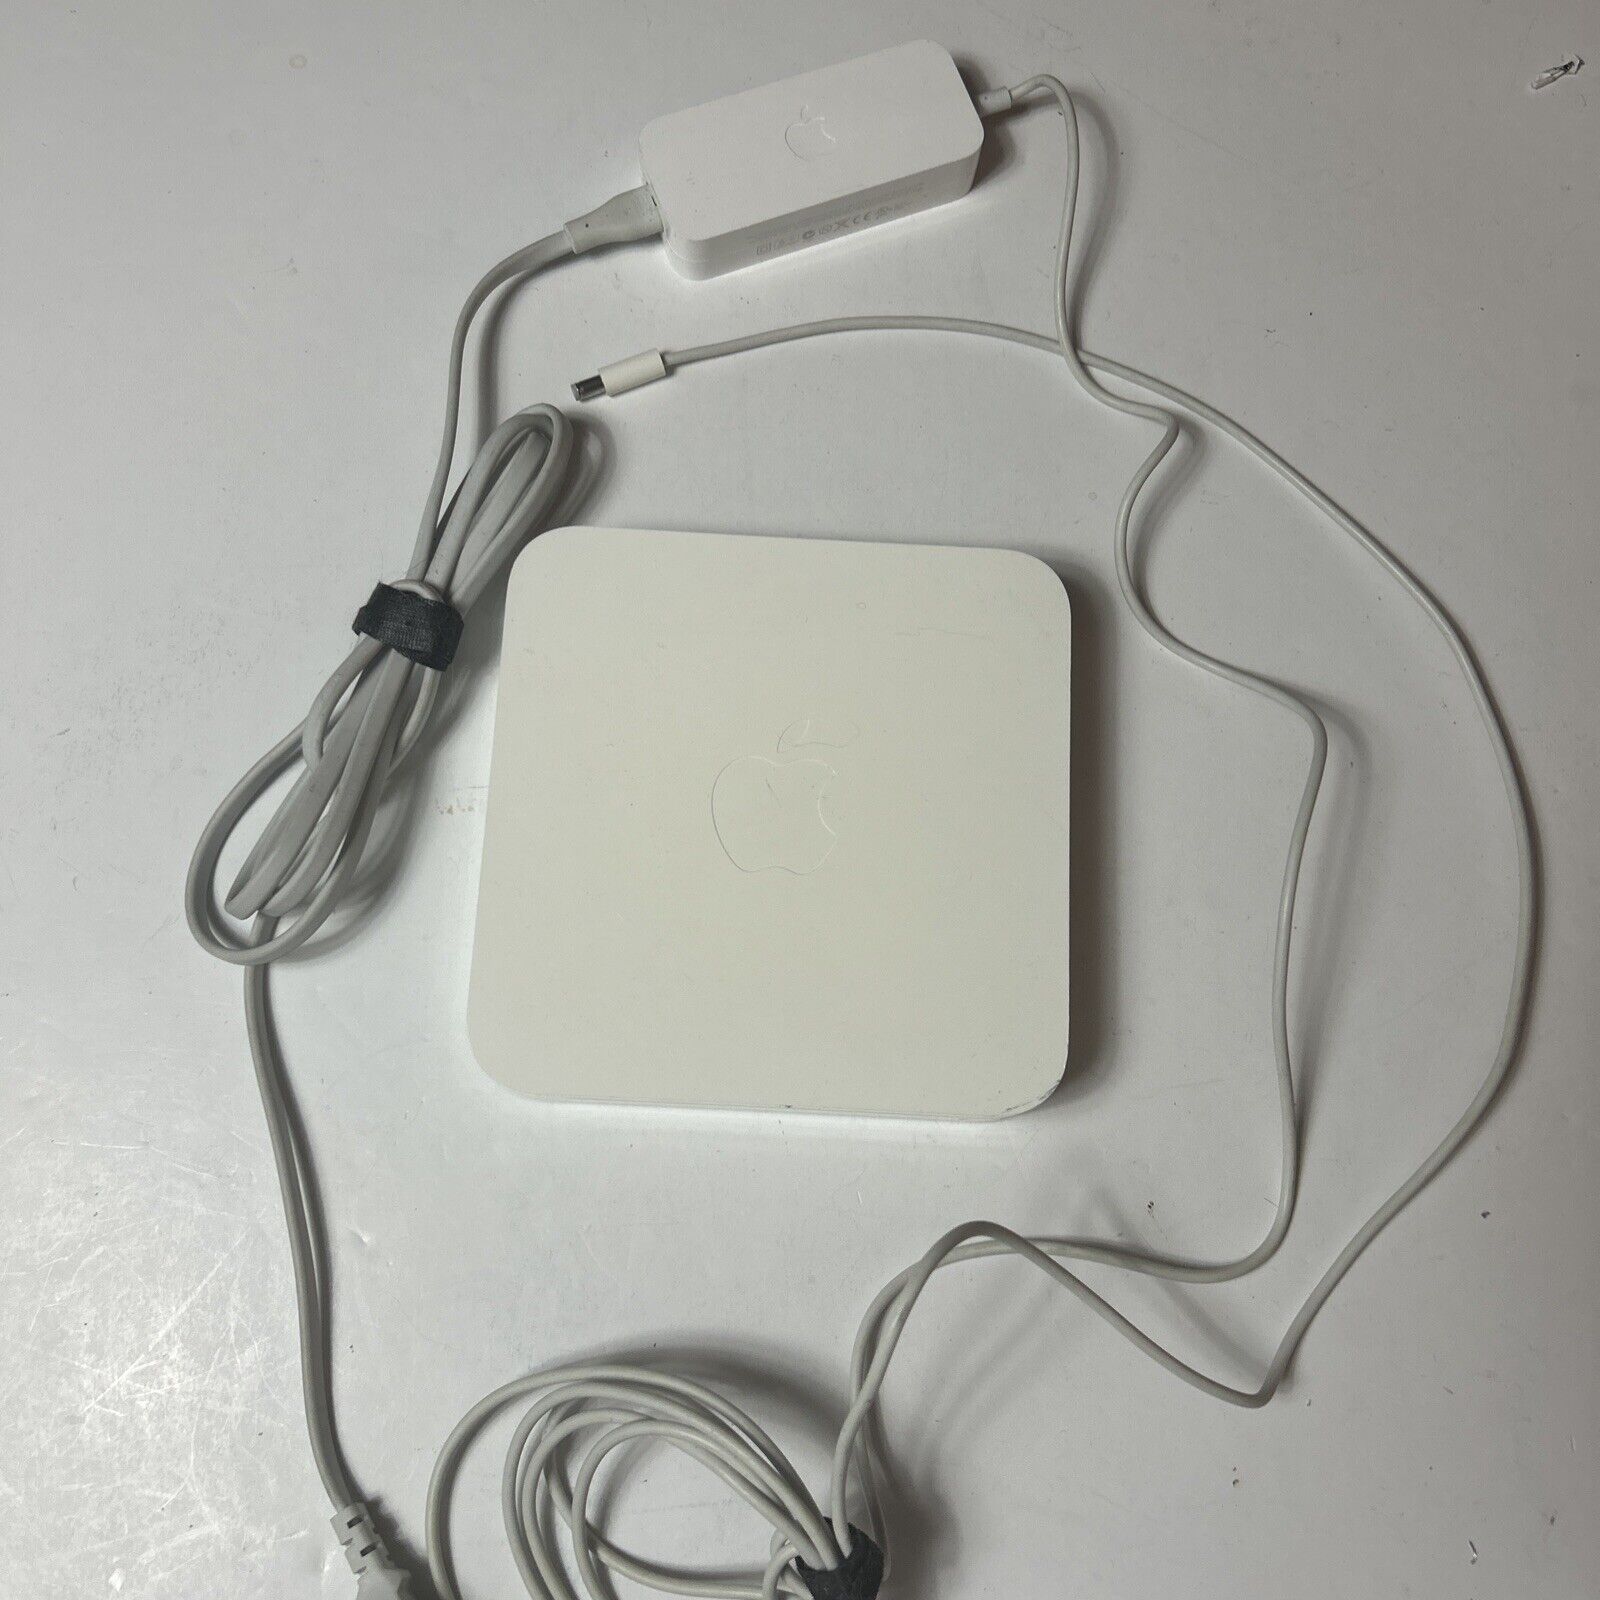 Apple AirPort Extreme 5th Gen Base Station 802.11n Wireless Router w/USB,  A1408